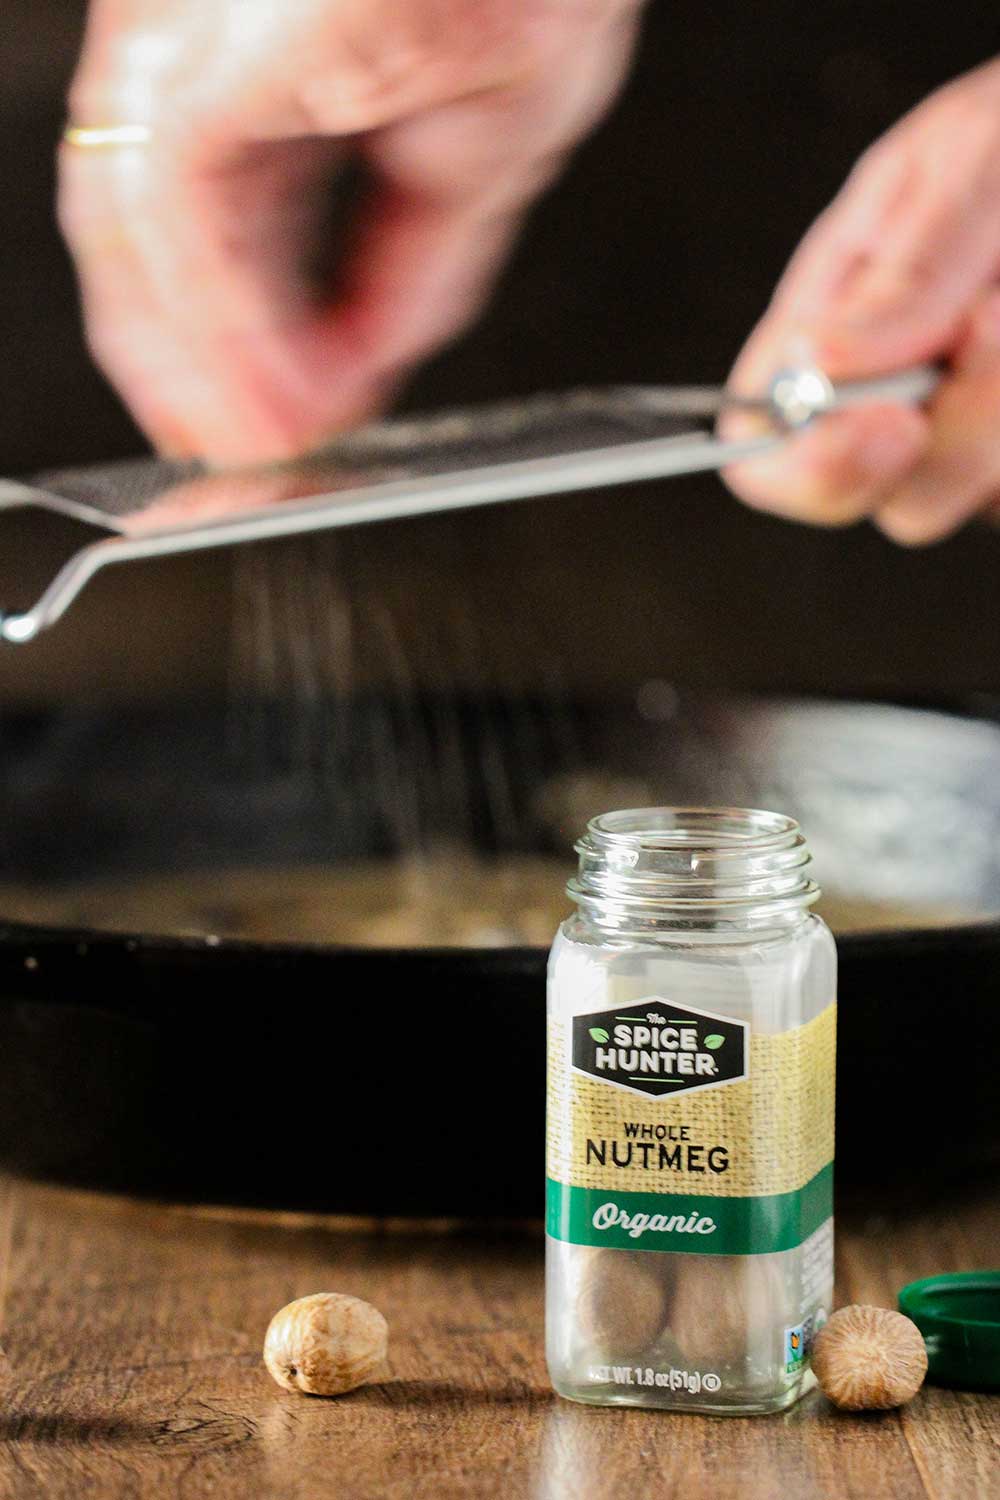 A hand scraping a whole nutmeg over a pan with a bottle of whole nutmegs in front of it. 